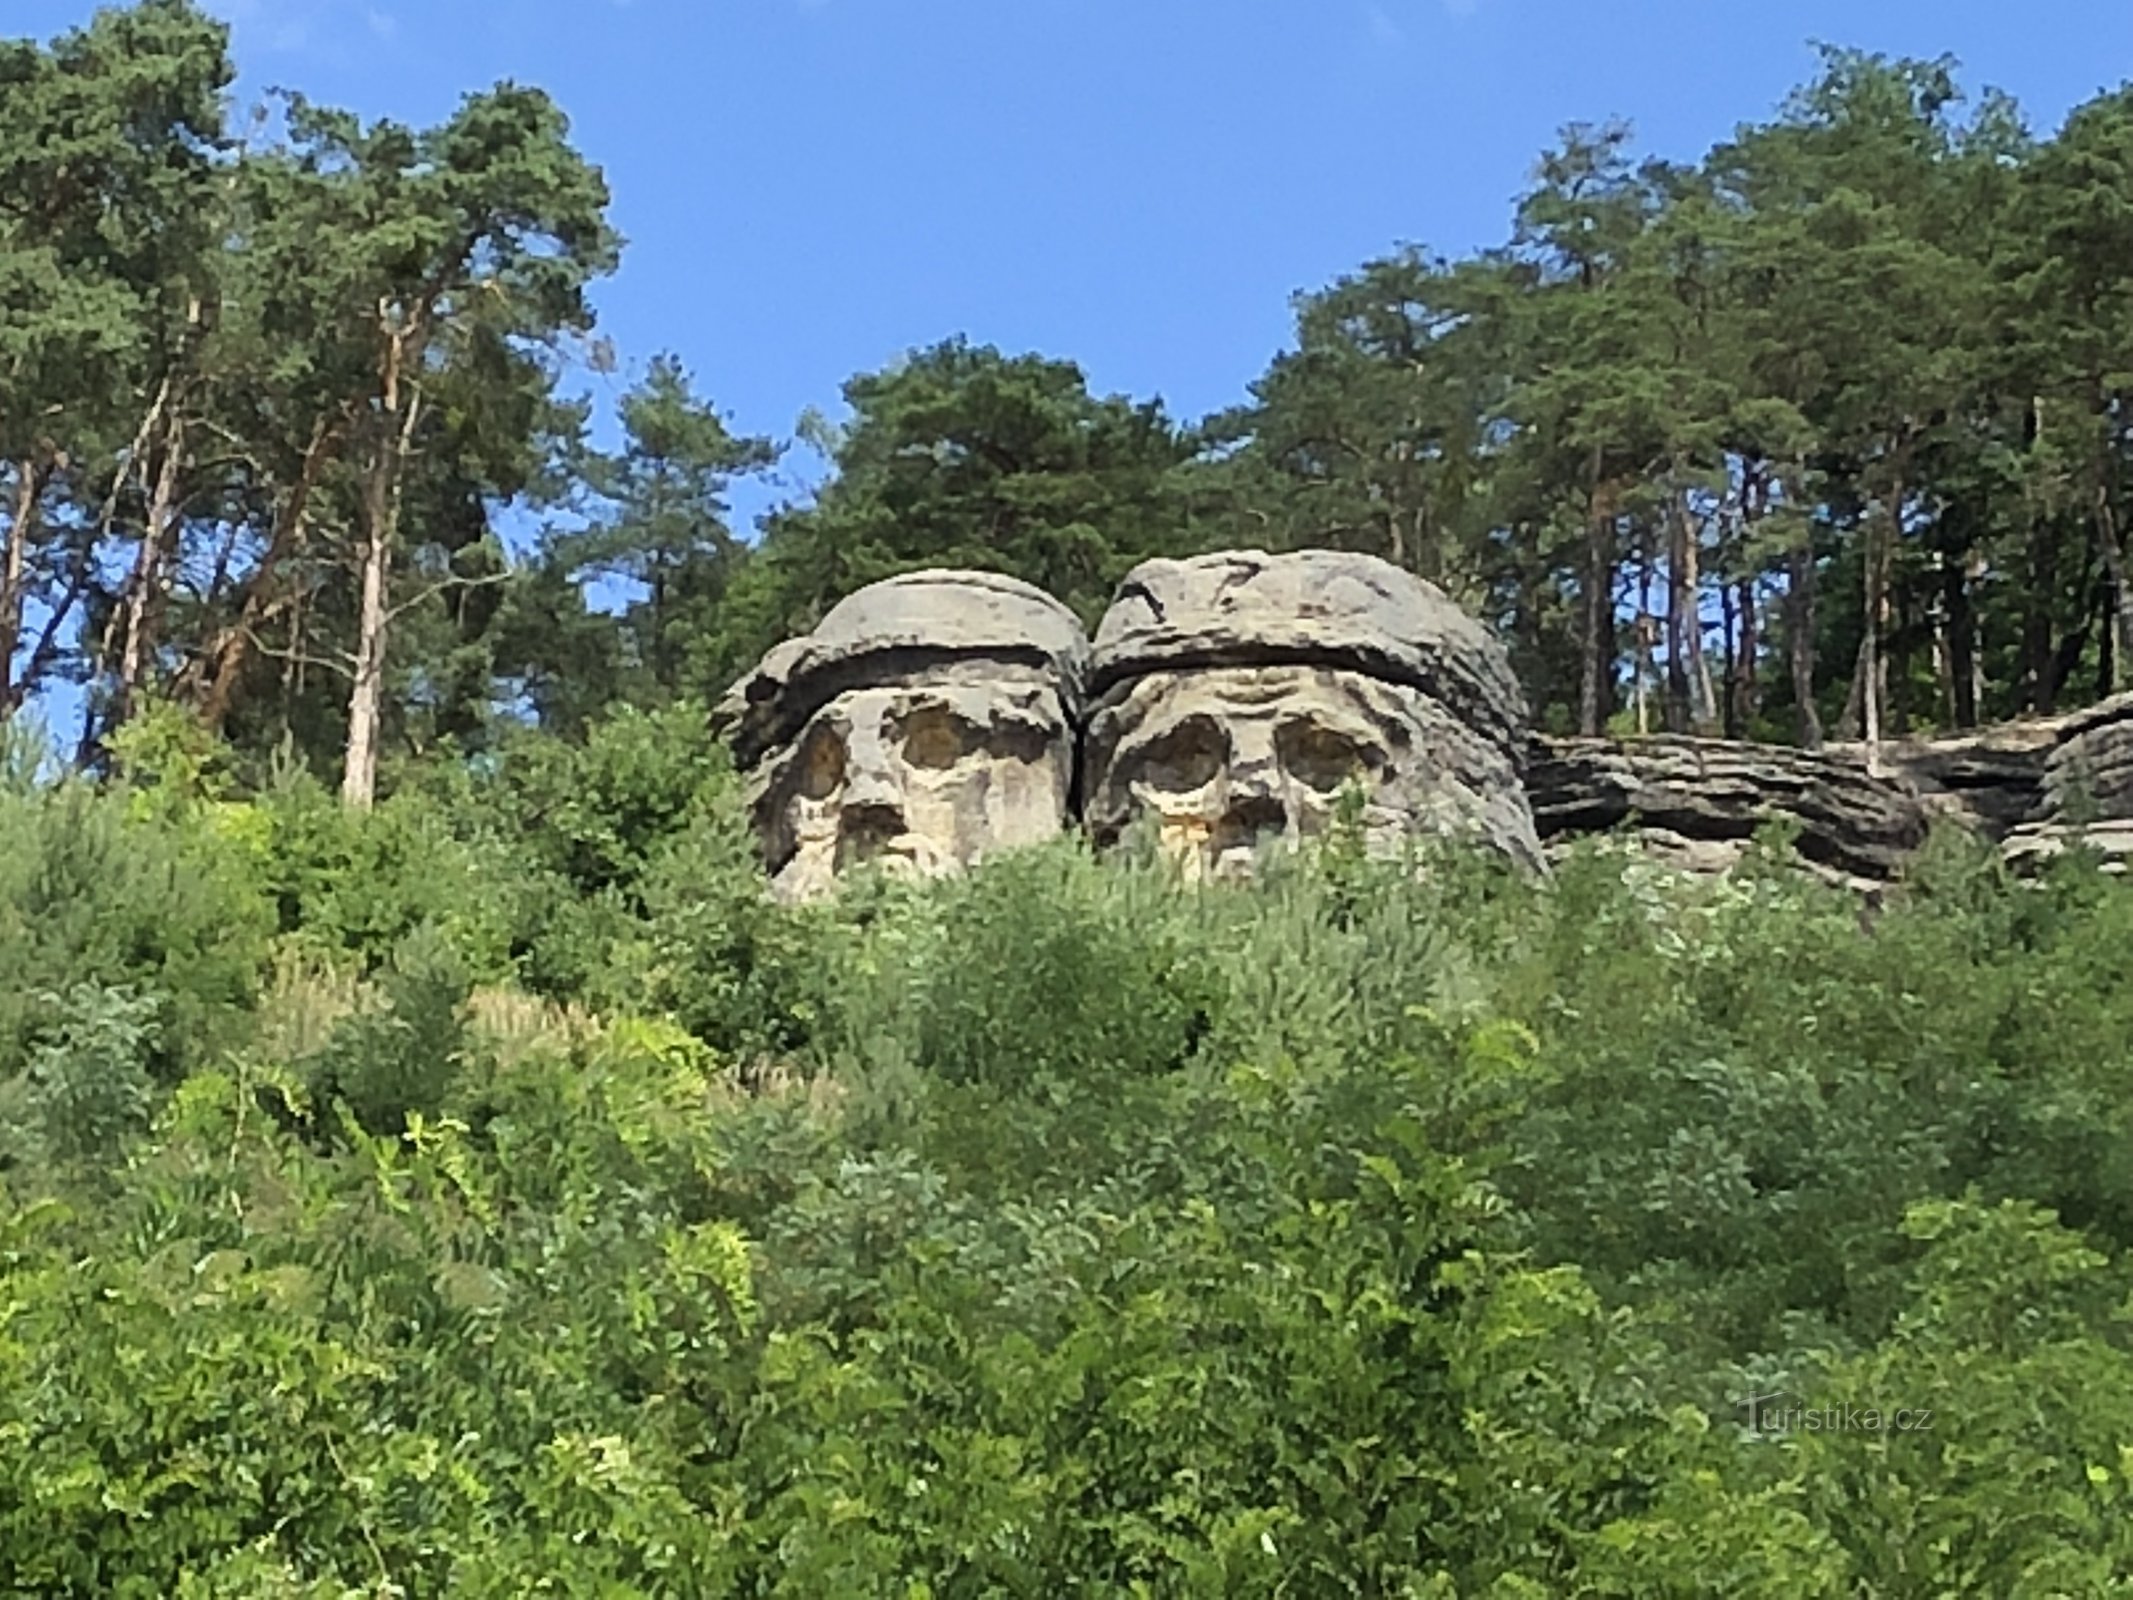 Devil's heads from the tourist path